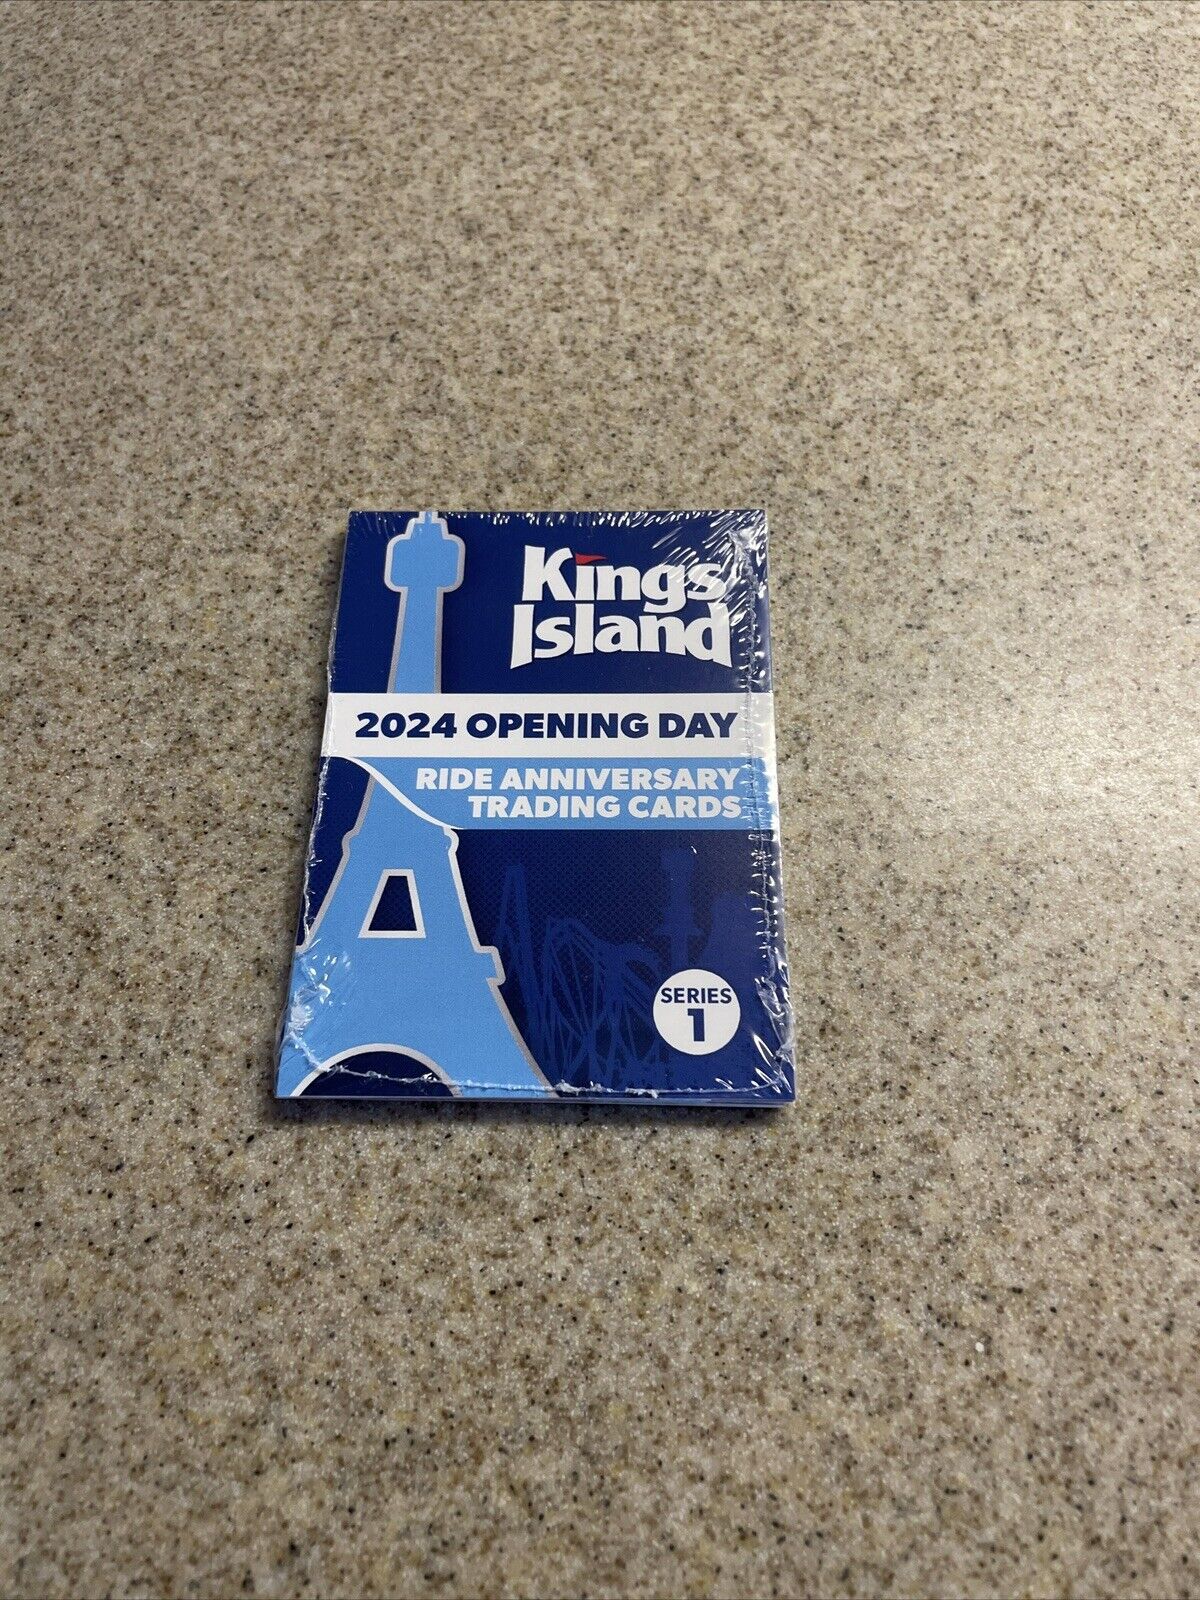 Kings Island 2024 Opening Day Ride Anniversary Trading Cards